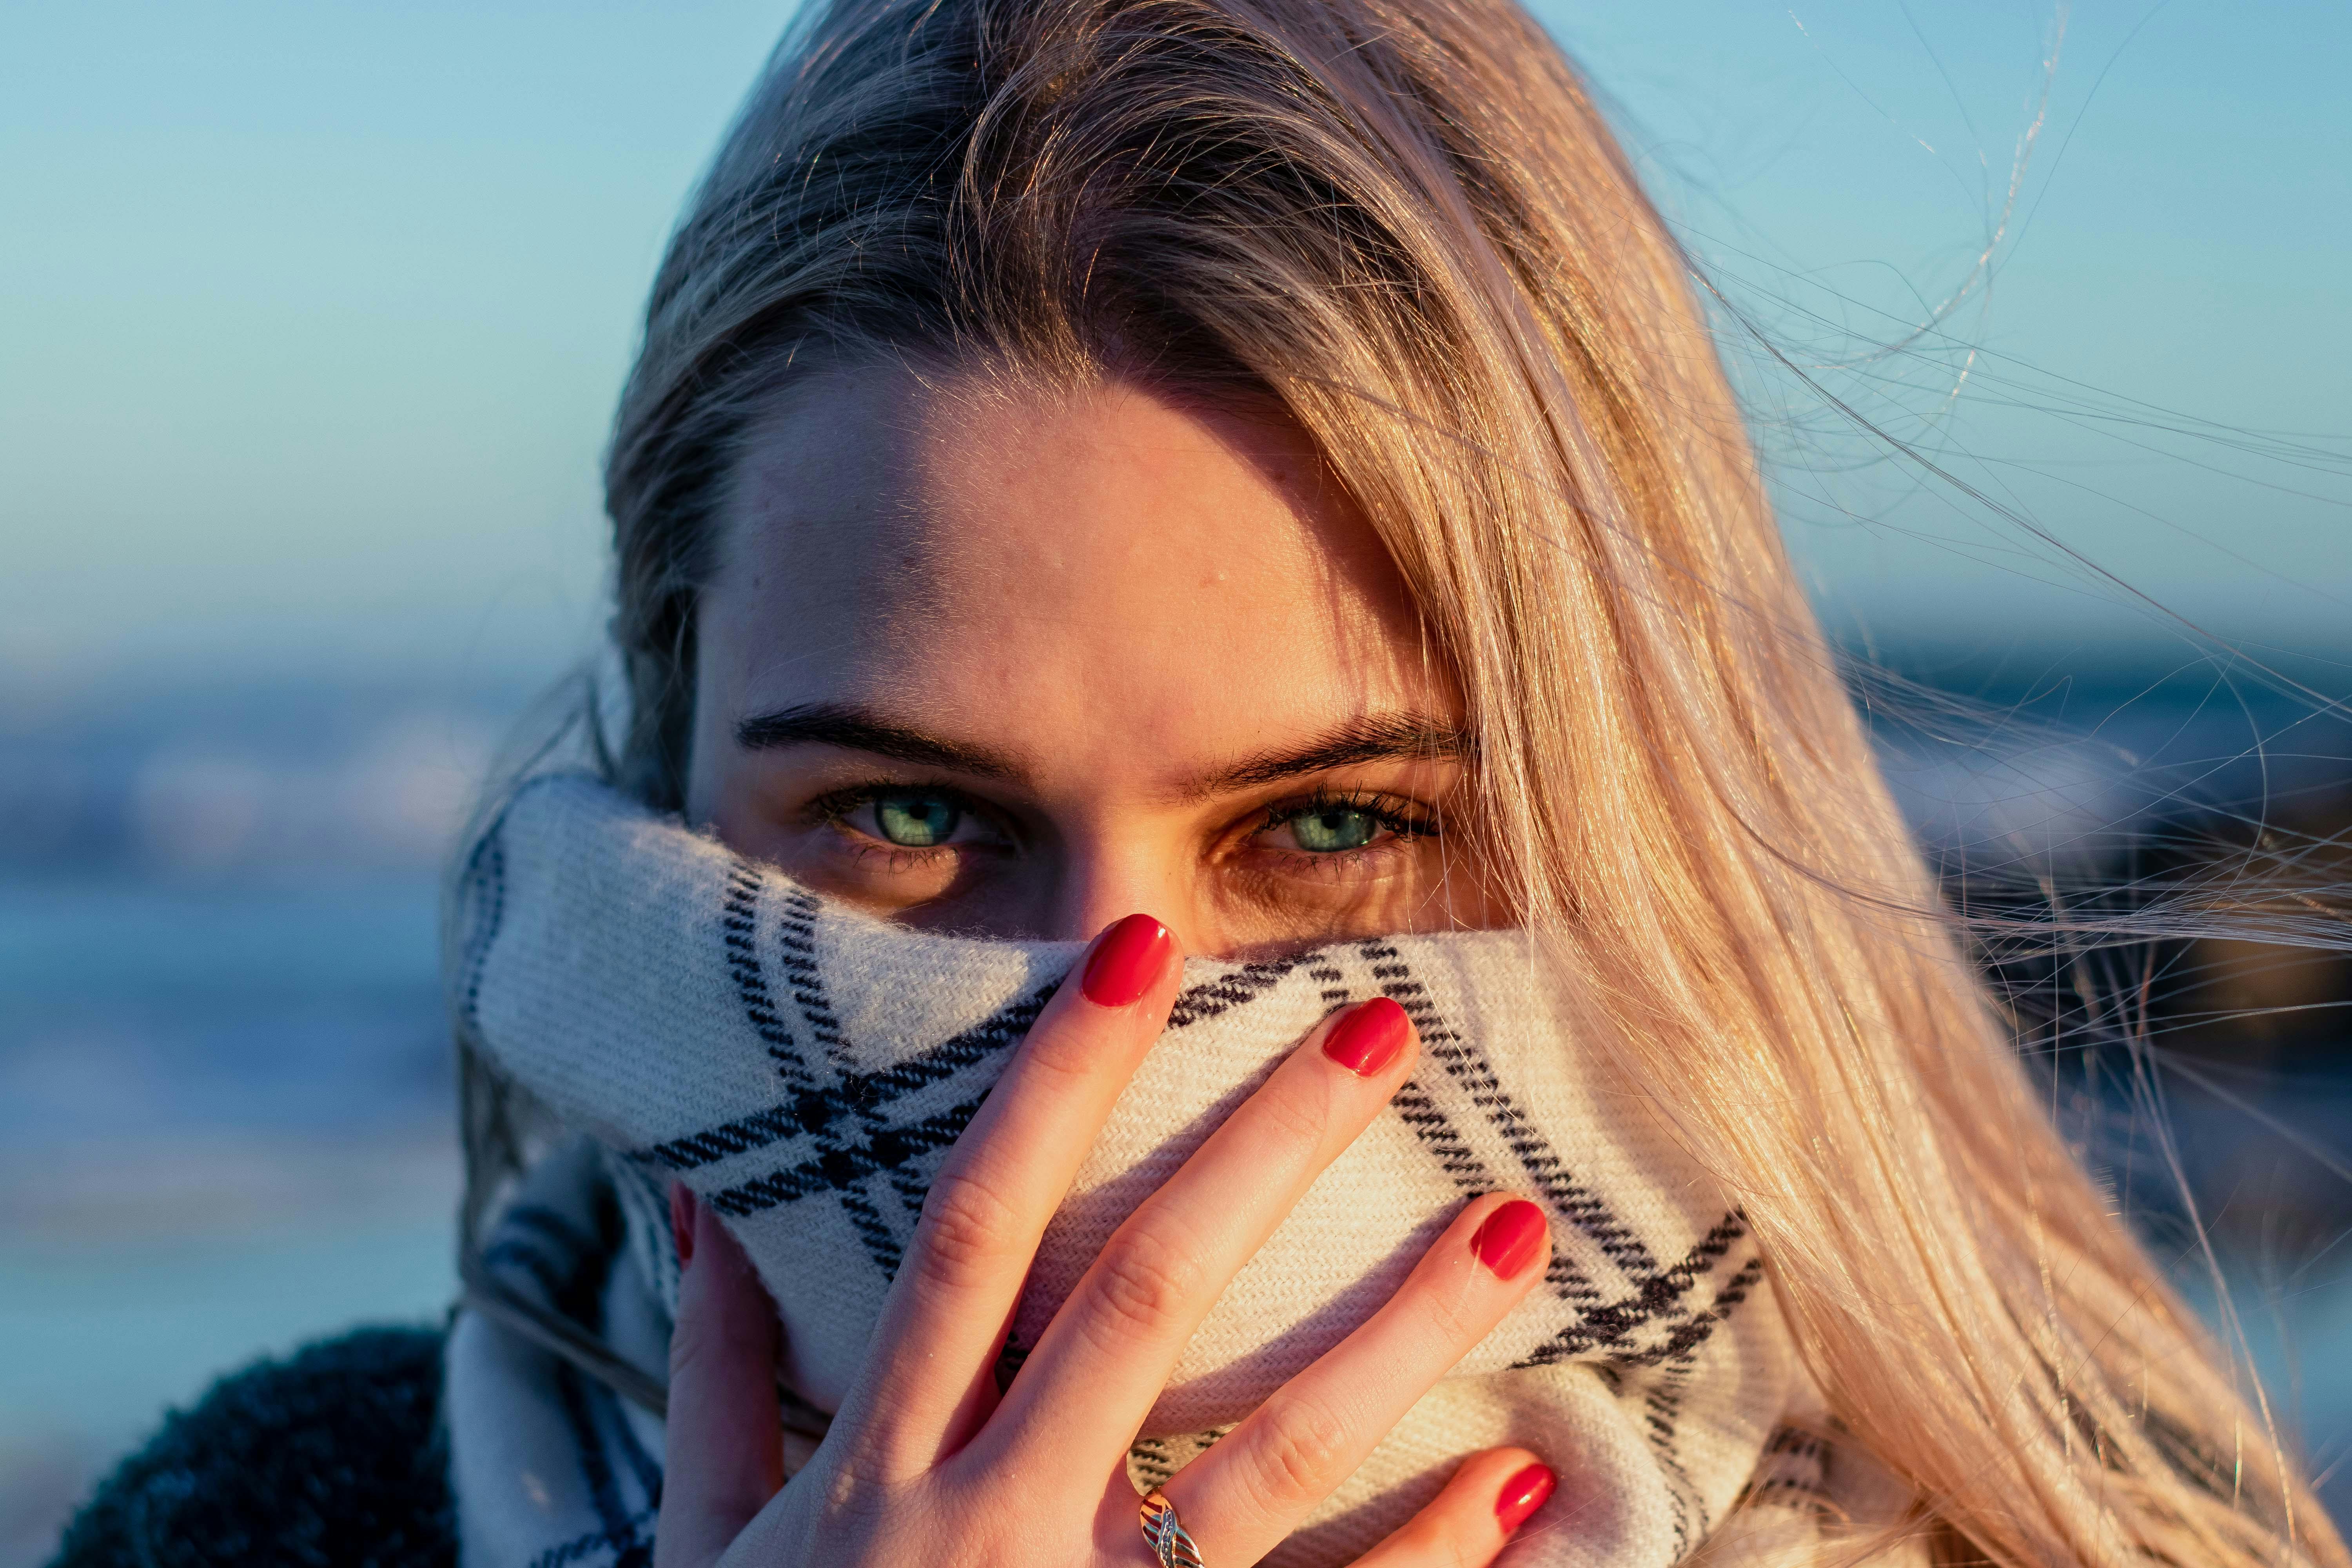 A person covering her face with a scarf. | Source: Pexels